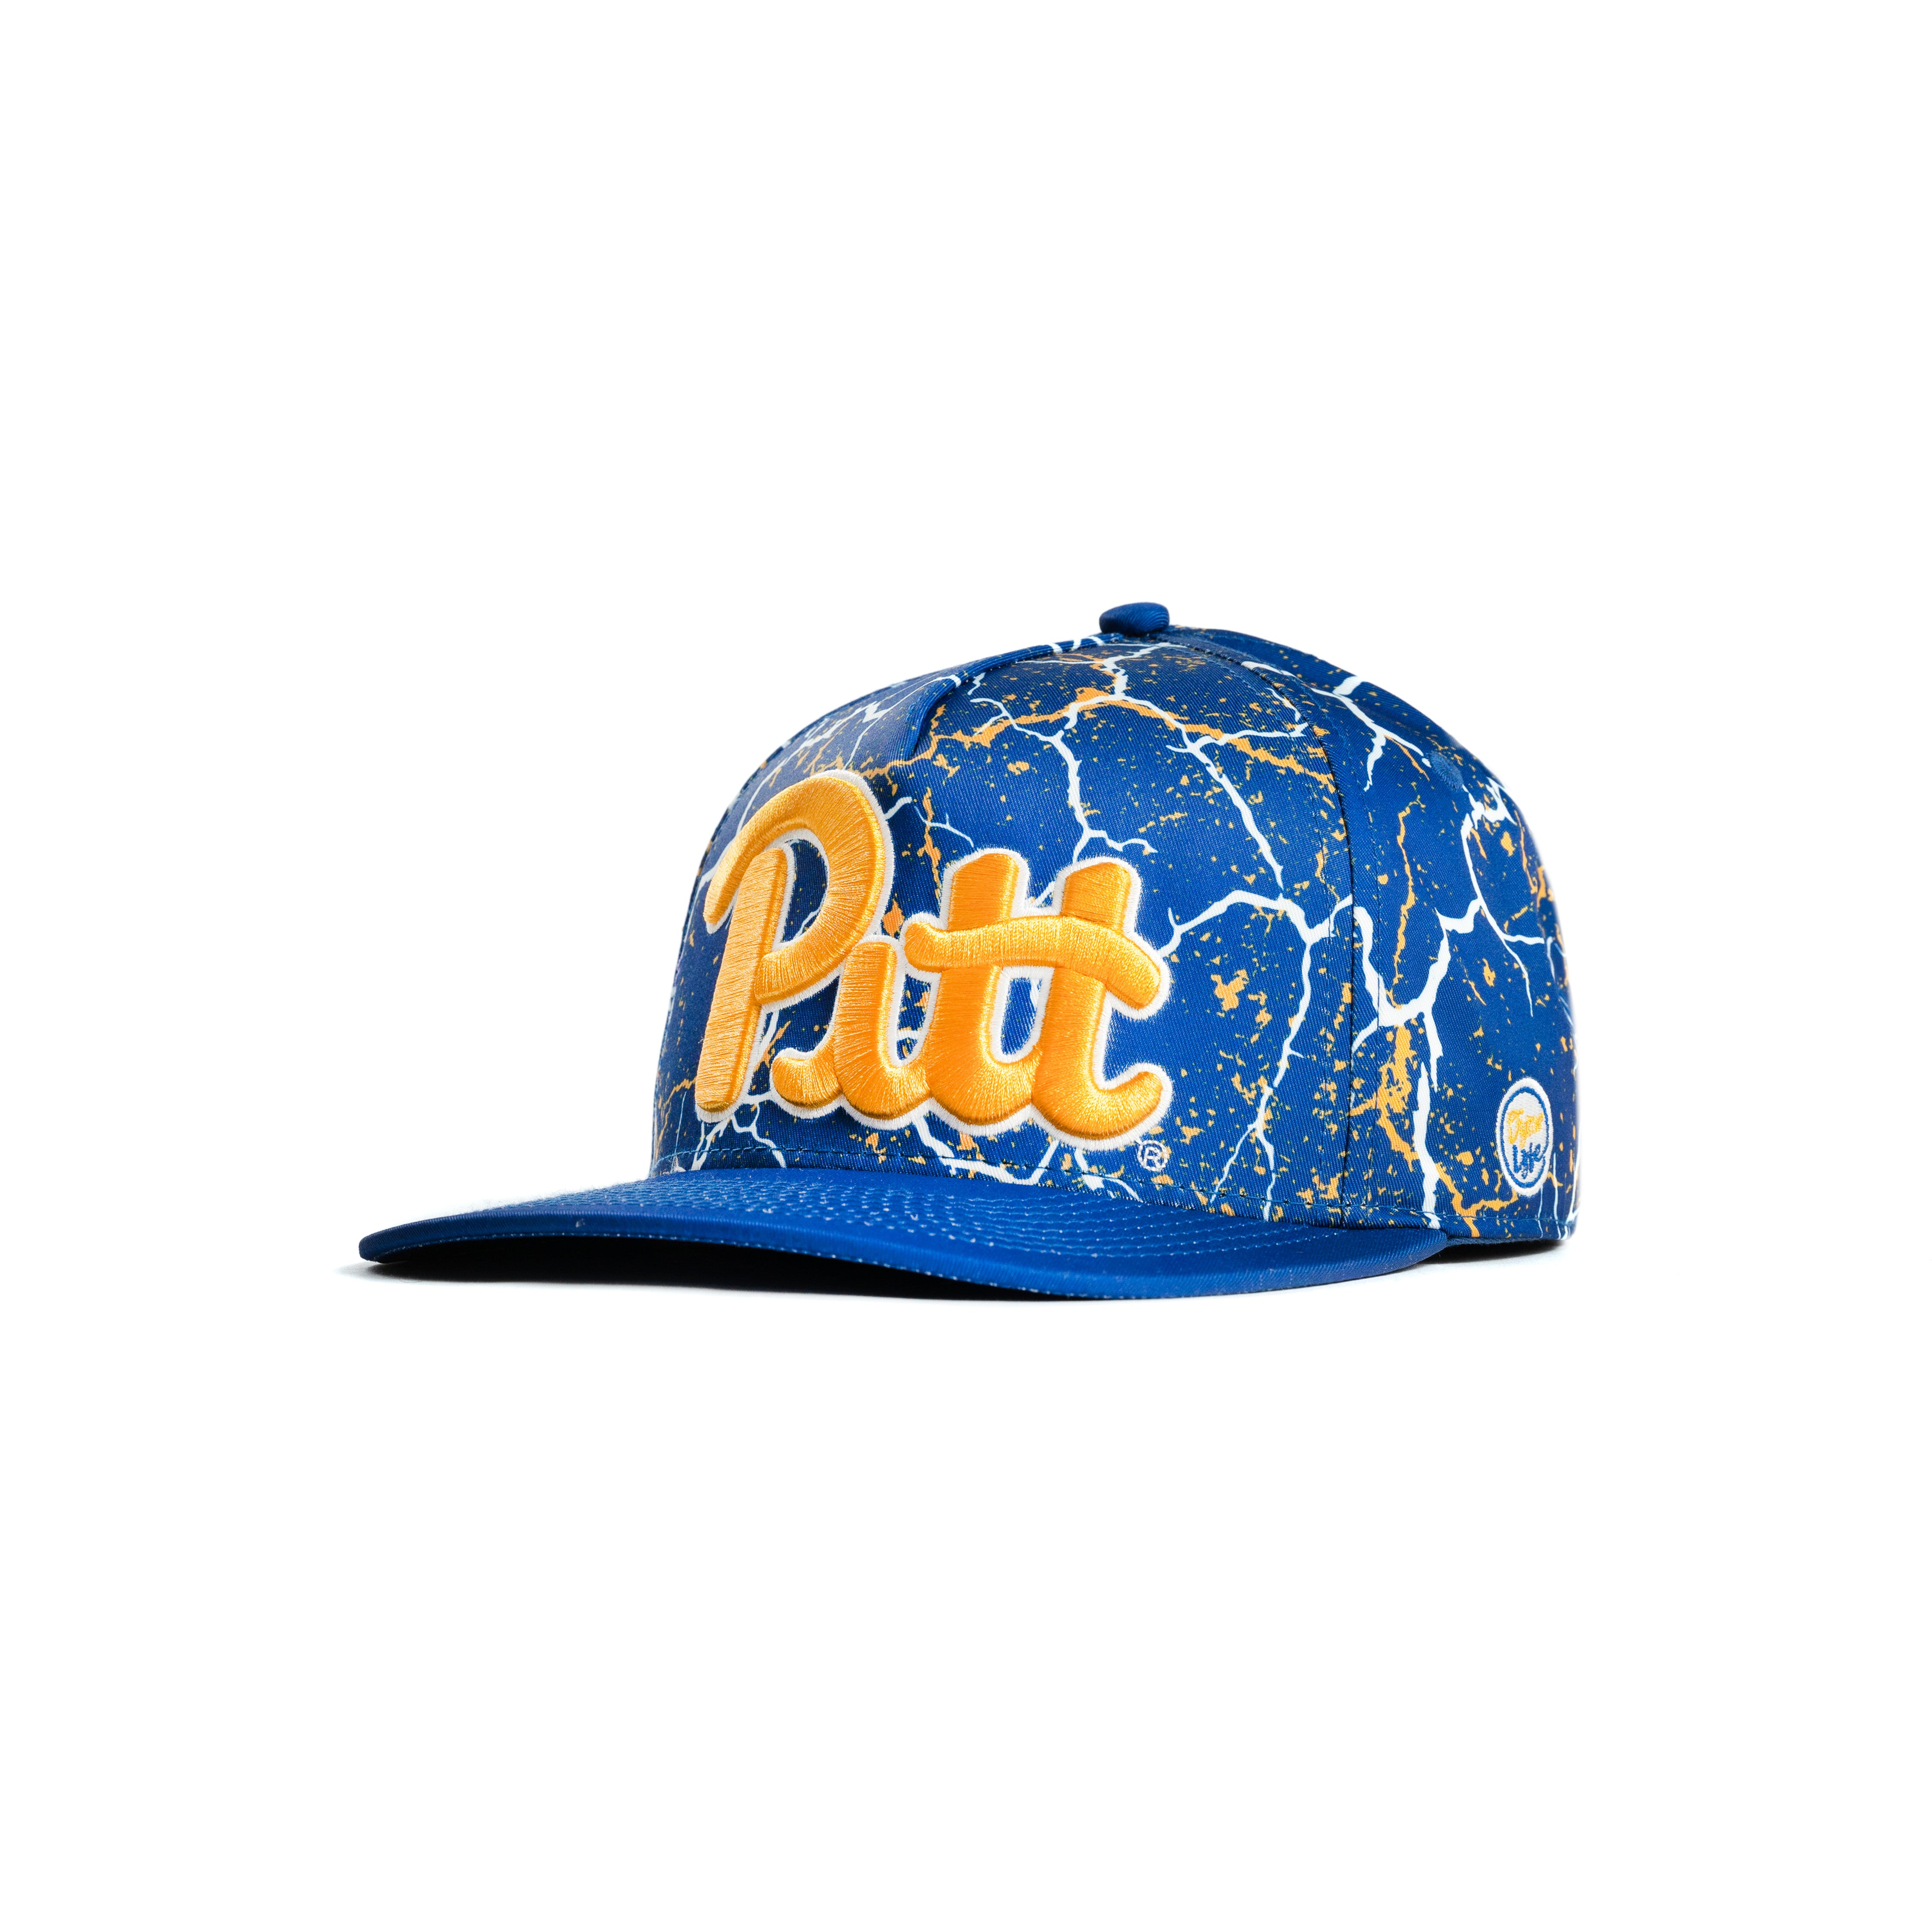 Pittsburgh Panthers Storm Snapback